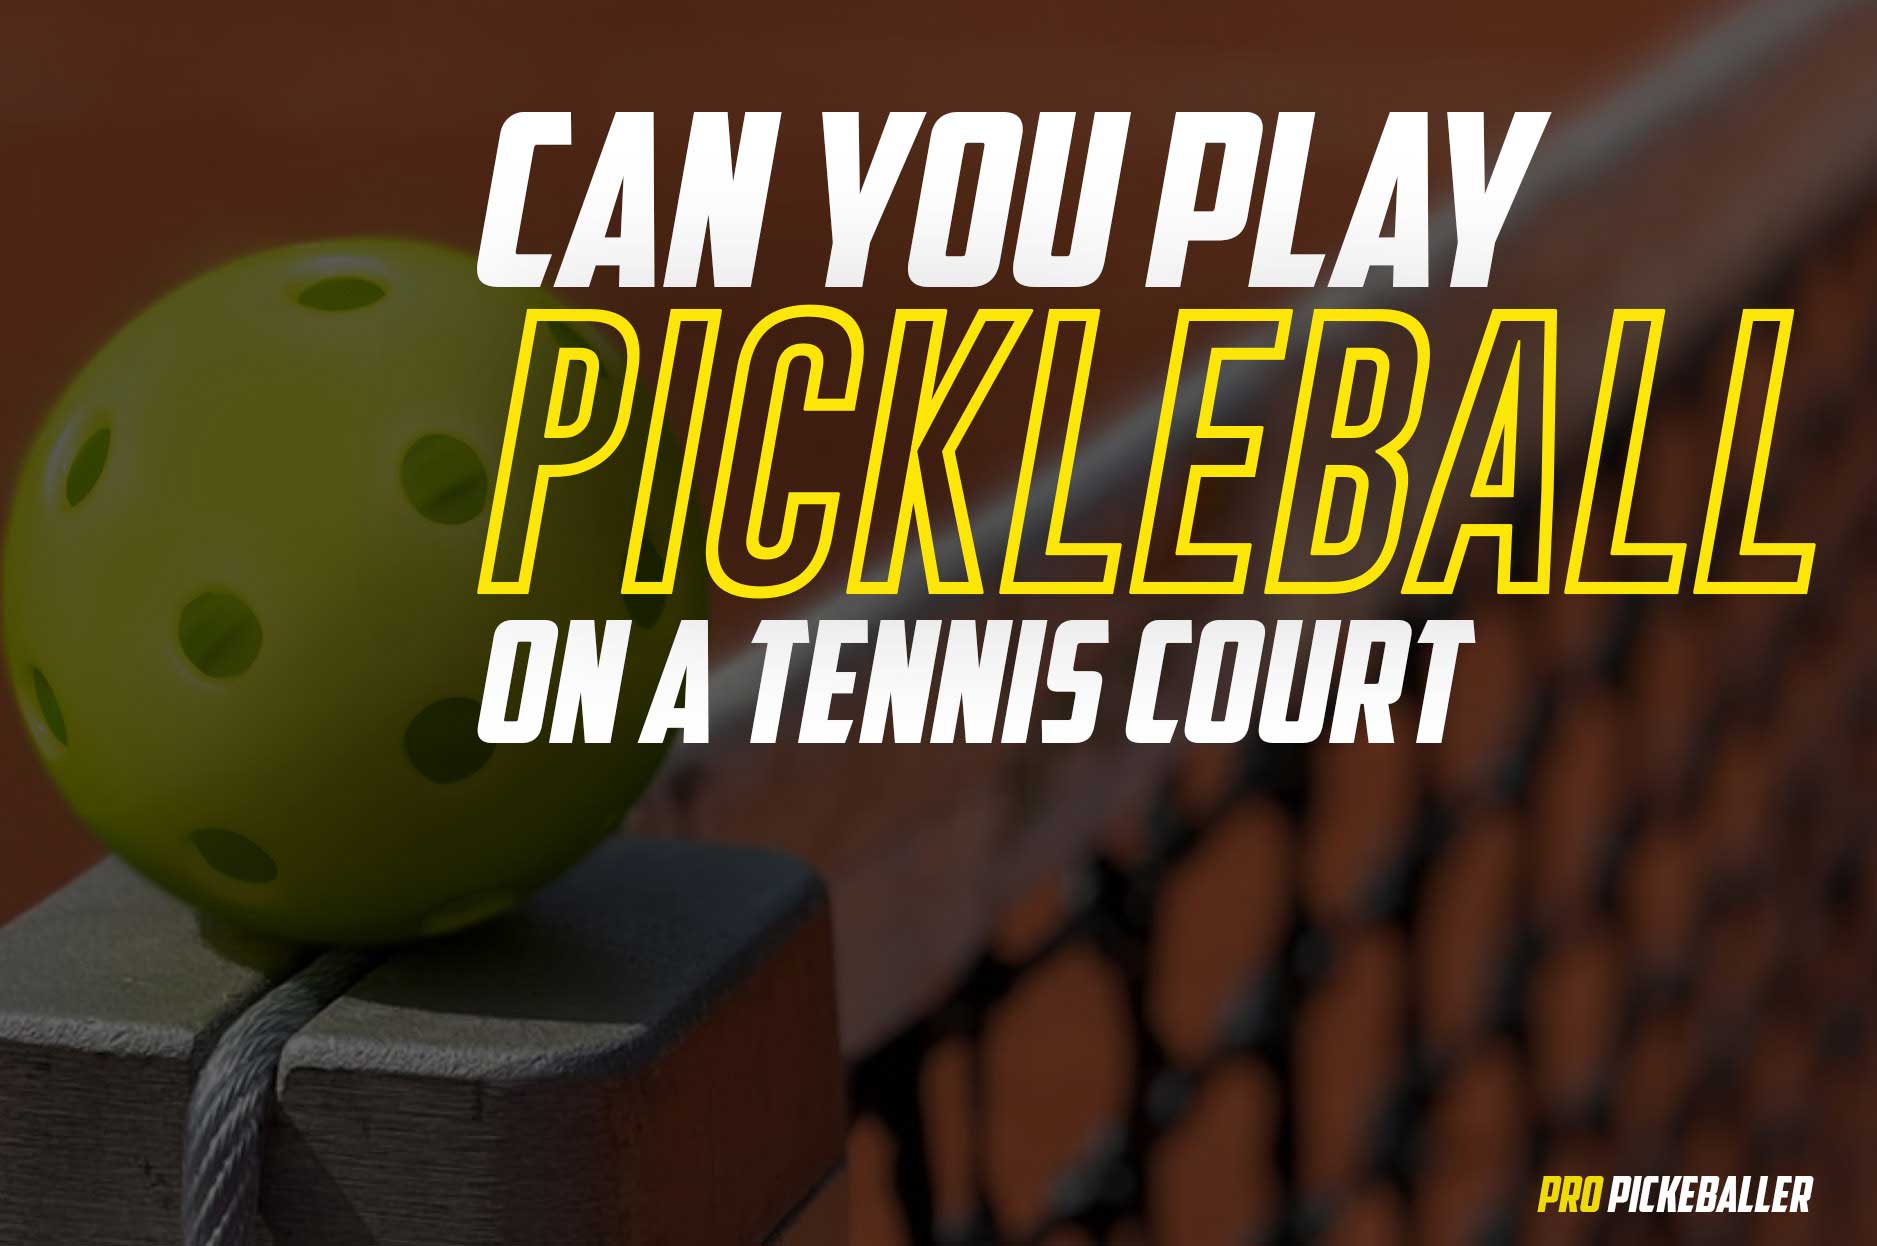 Can You Play Pickleball On A Tennis Court: Pickleball Craze